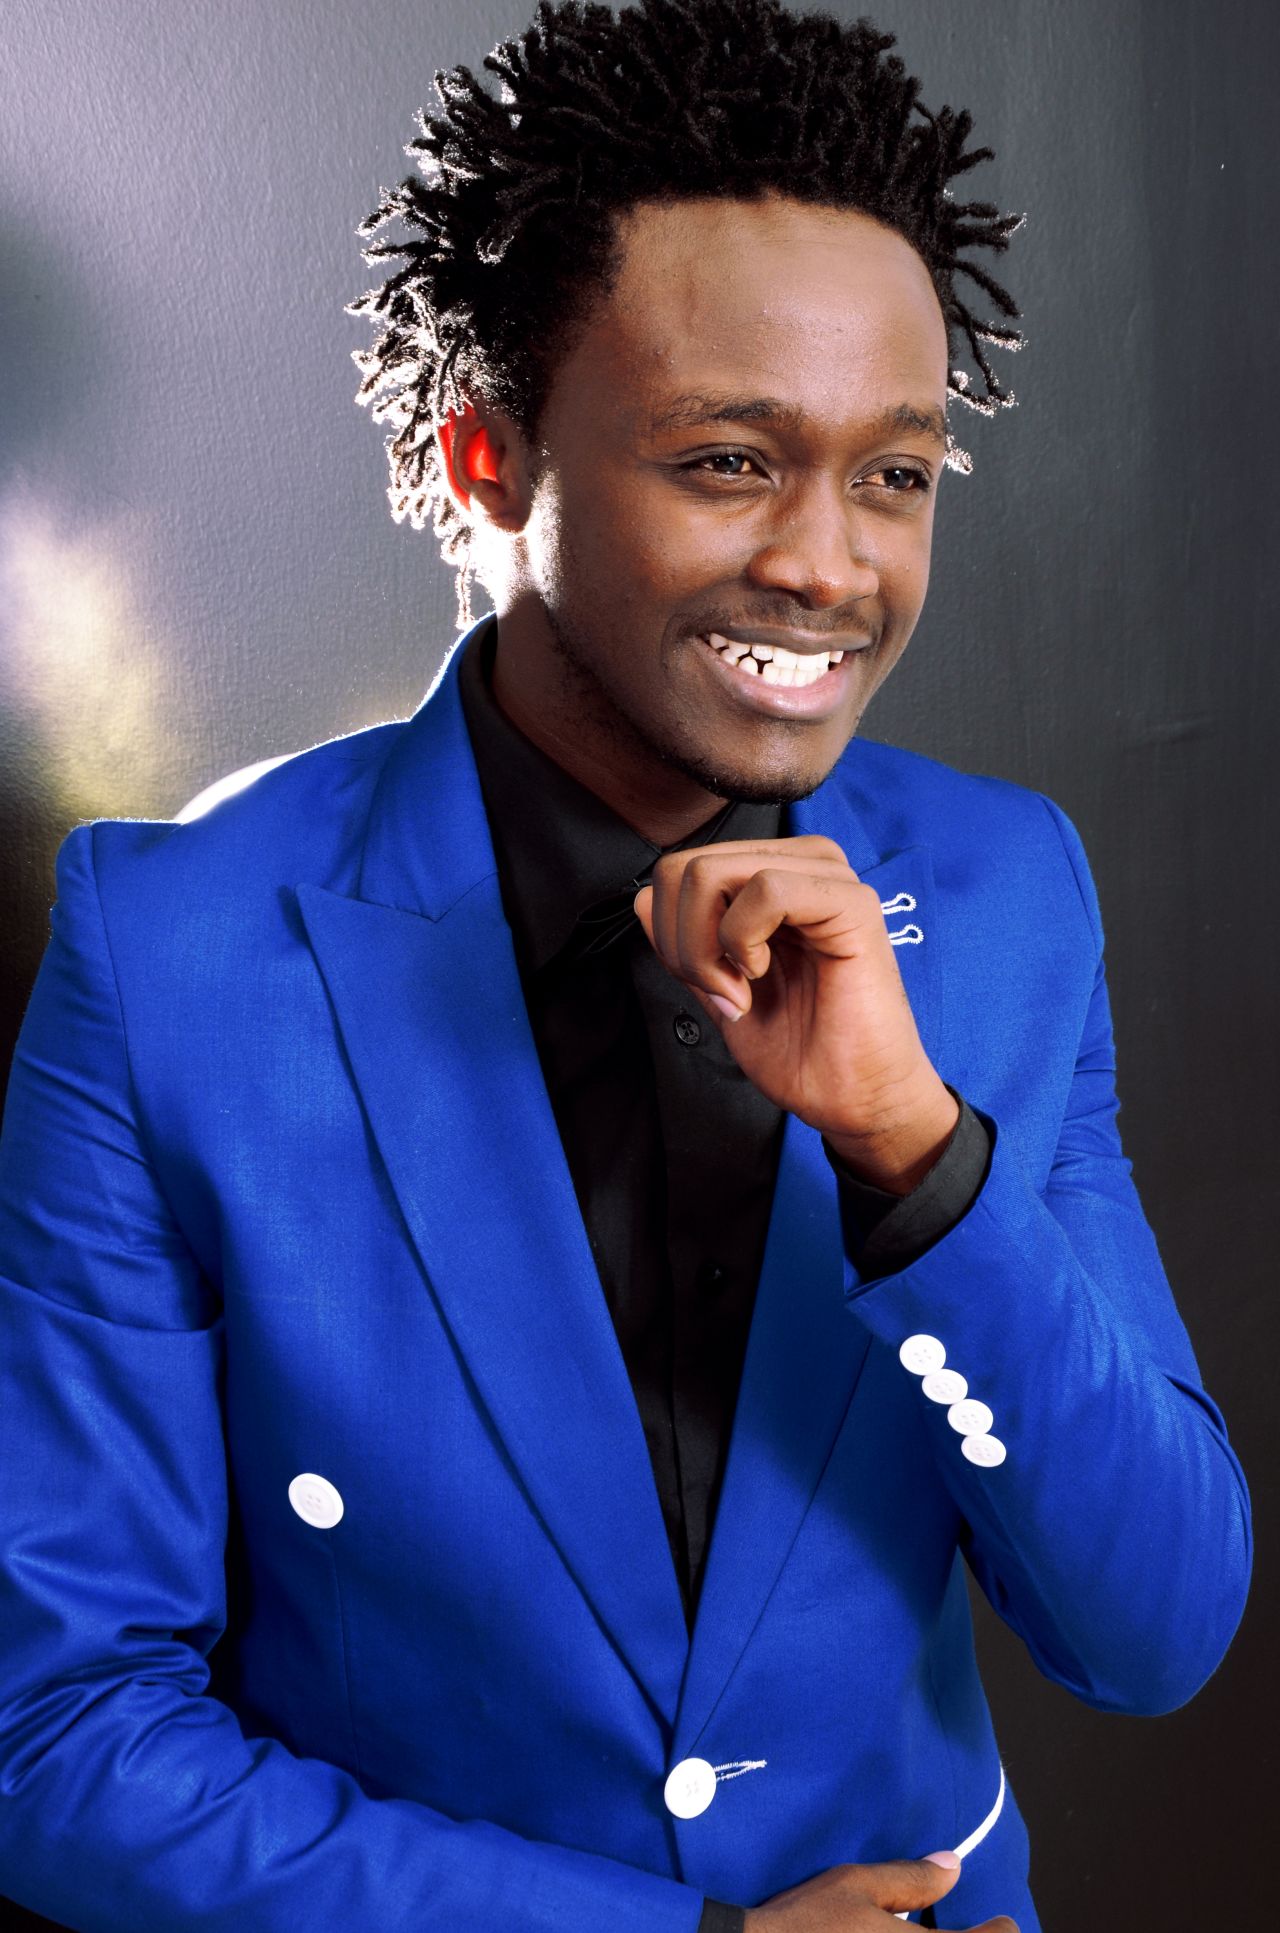 Another gospel artist from Kenya, Bahati's musical journey started in 2013 with the release of his first single and video titled "Siki Ya Kwanza." Now he has a total of seven awards, including include Best Male Artist at the Coast Awards 2013. 